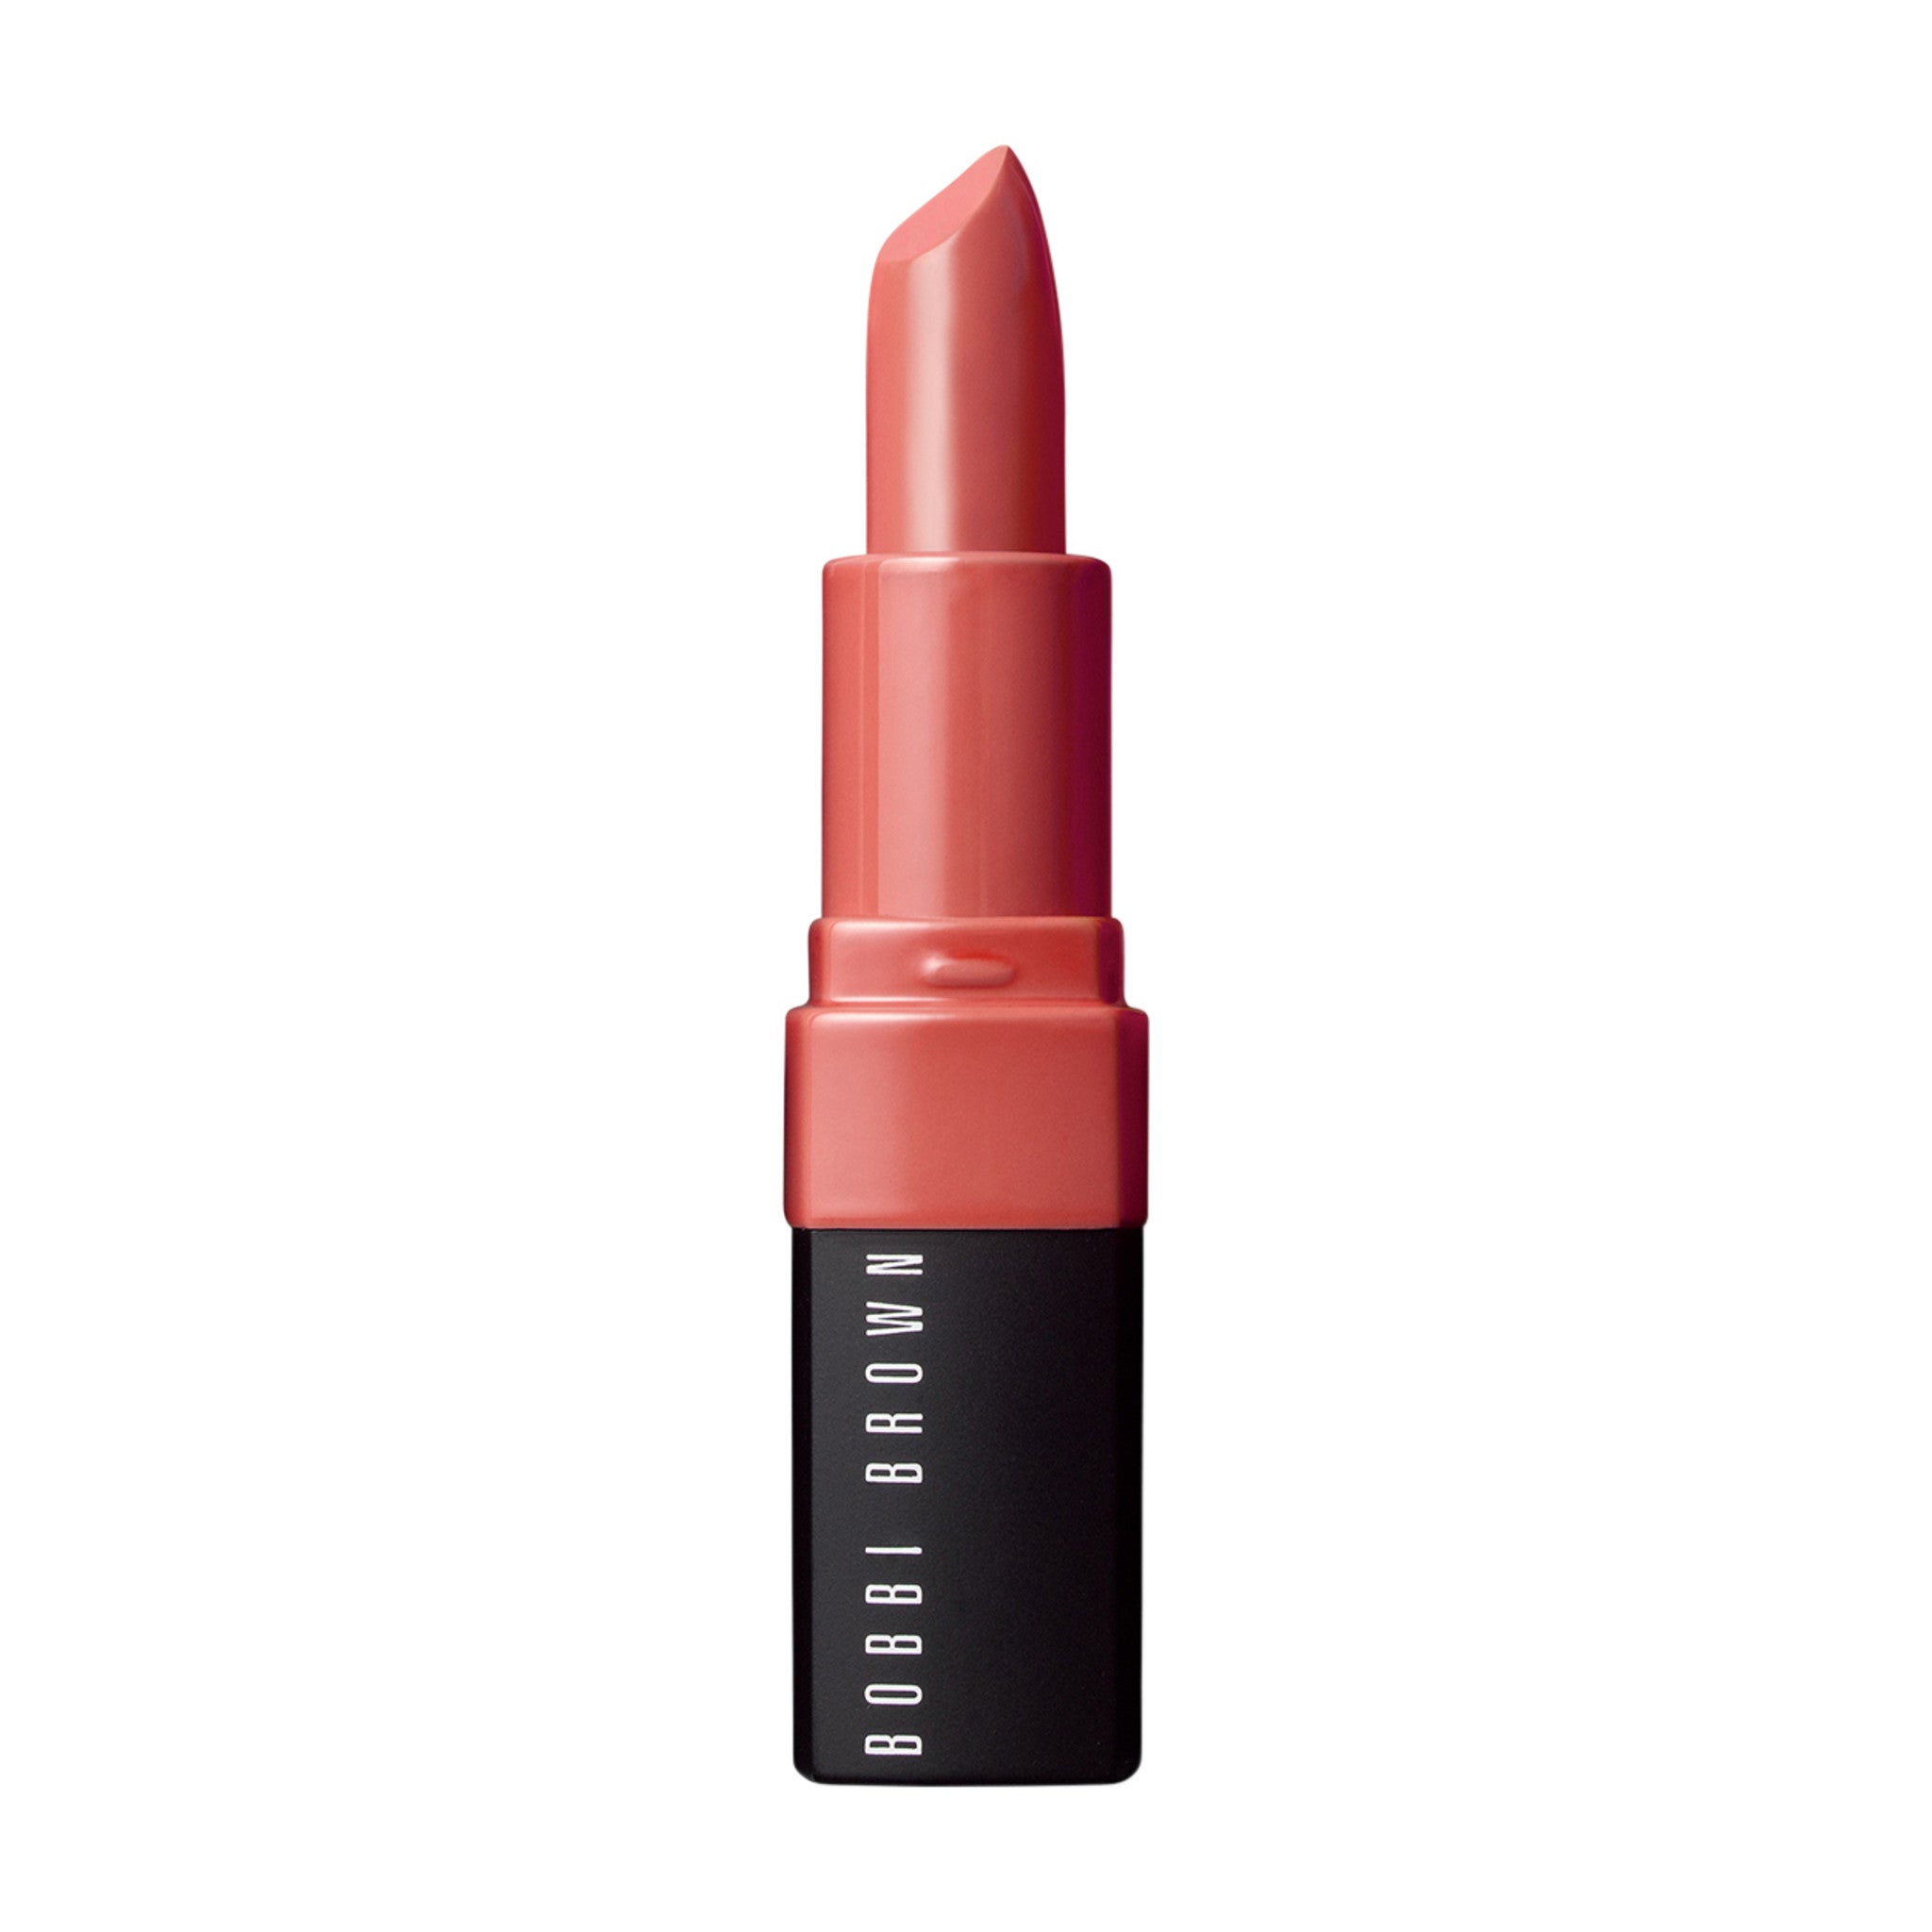 Bobbi Brown Crushed Lip Color Color/Shade variant: Cabana main image. This product is in the color coral